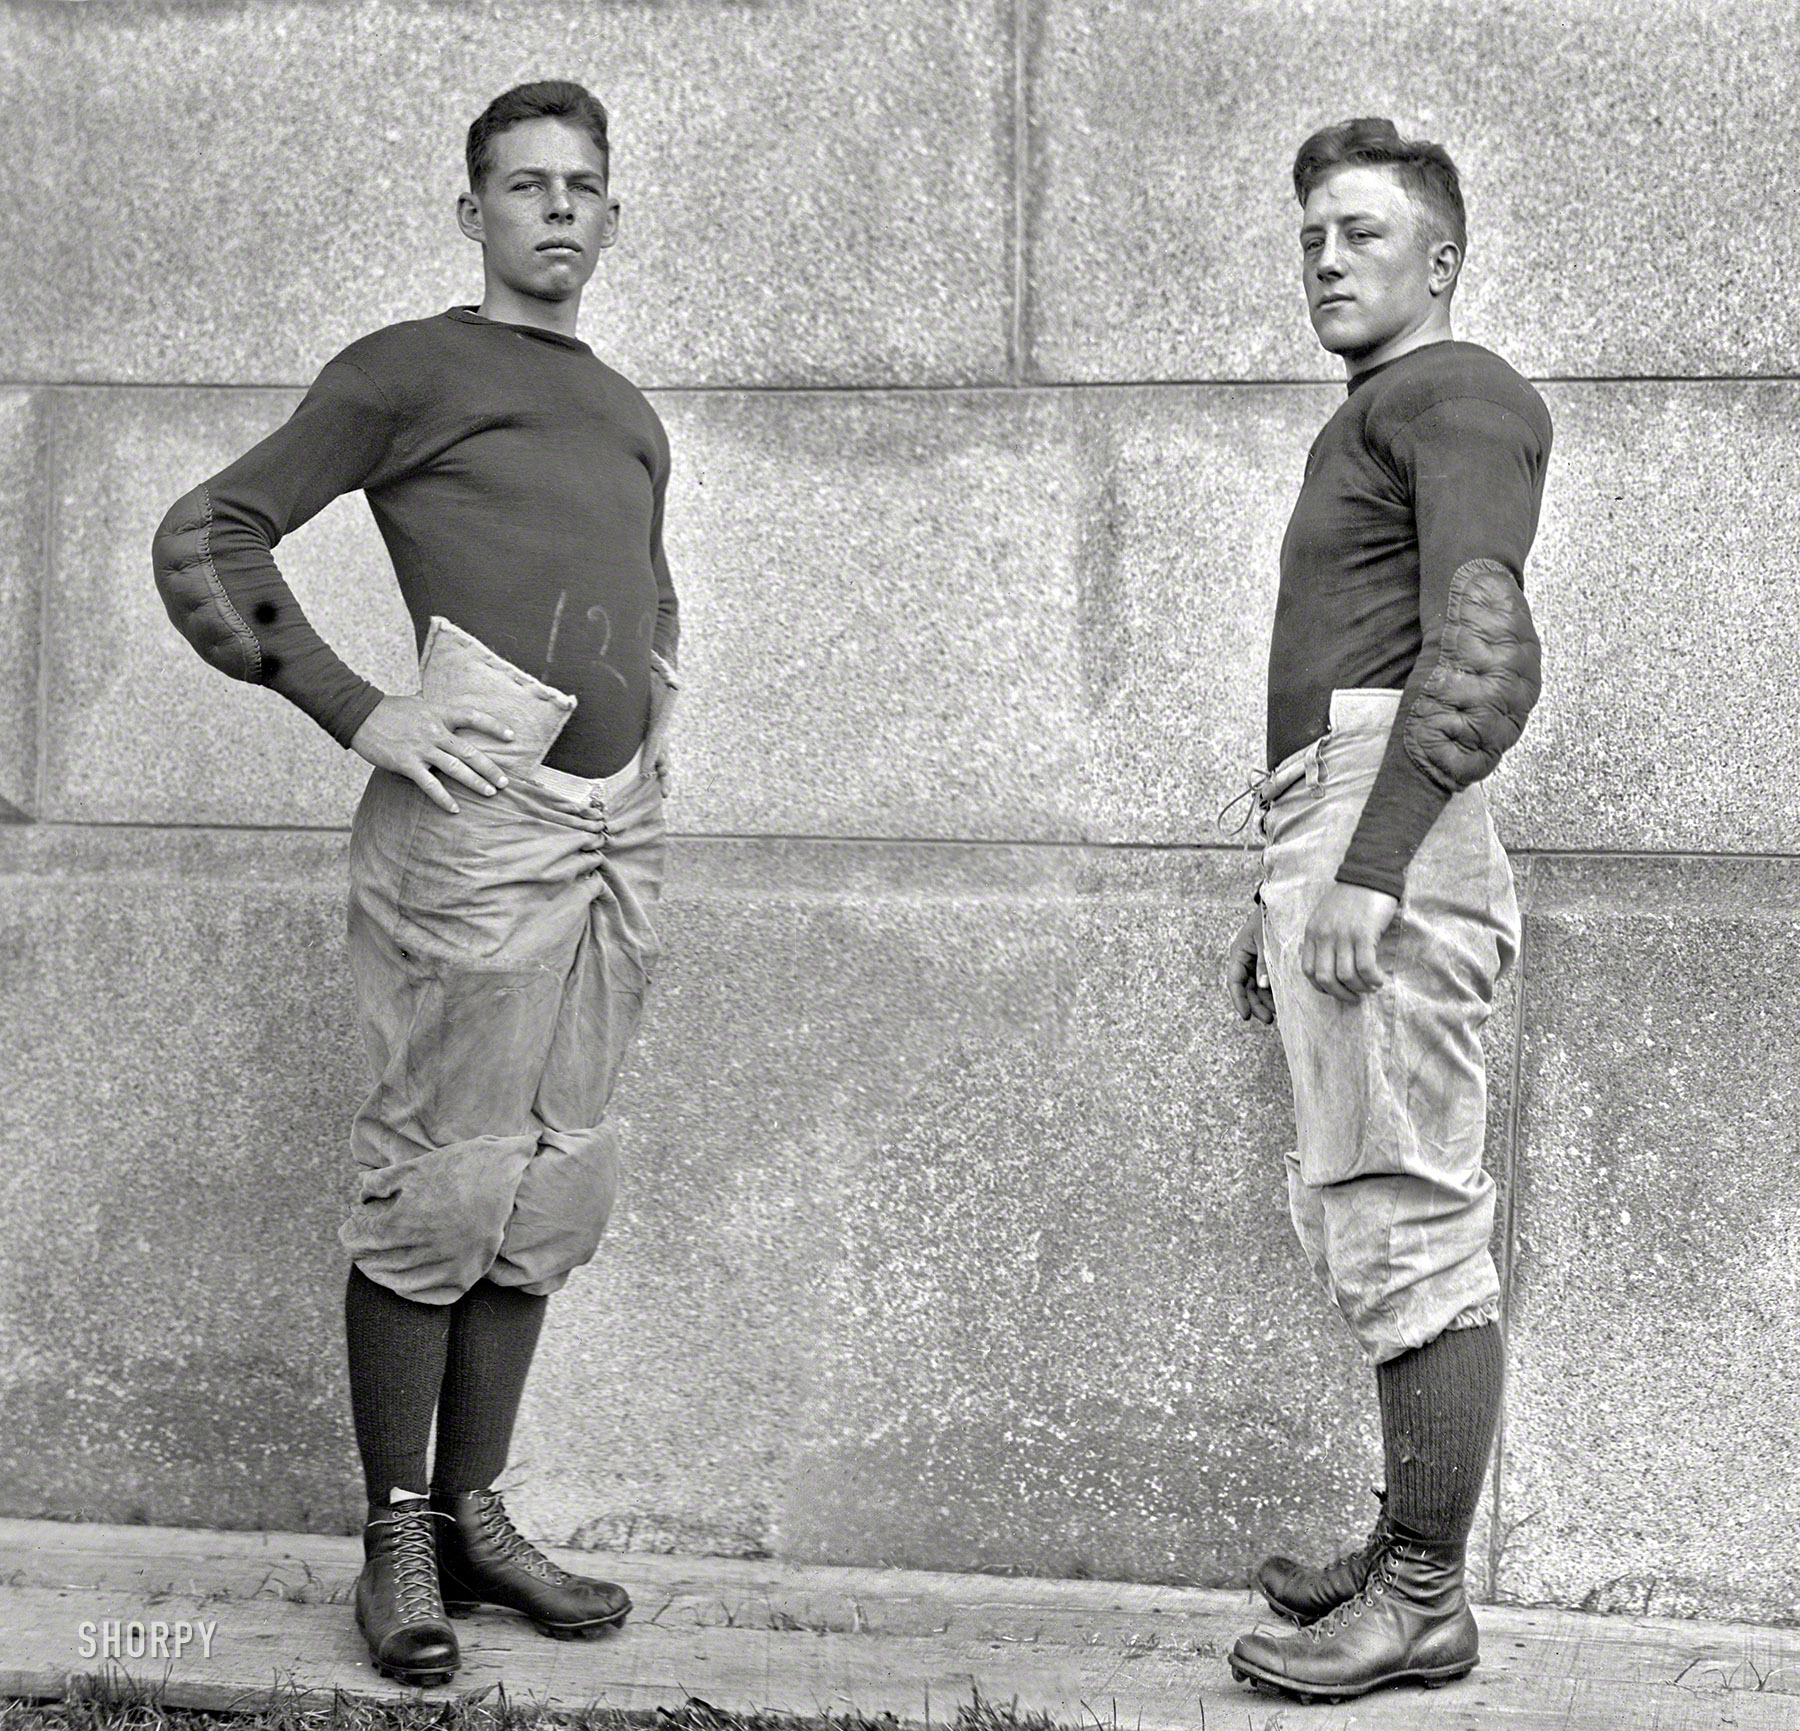 1913. Annapolis, Maryland. "U.S. Naval Academy football team." Composite of two 5x7 glass negatives by Harris & Ewing. View full size.